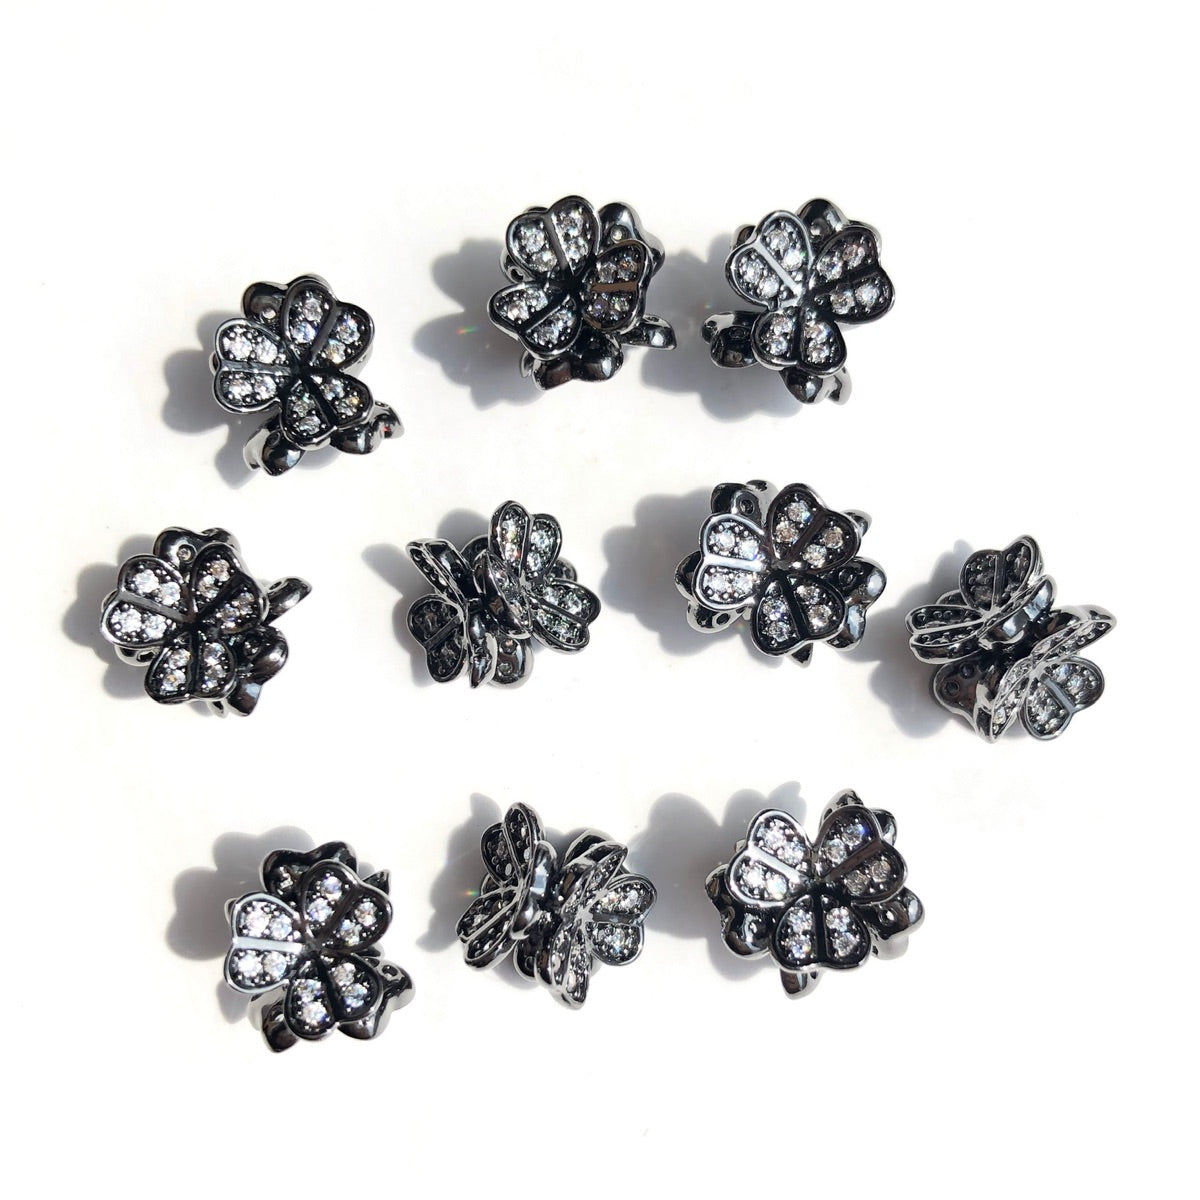 10-20-50pcs/lot 9mm CZ Paved Clover Flower Spacers Clear on Black CZ Paved Spacers New Spacers Arrivals Wholesale Charms Beads Beyond